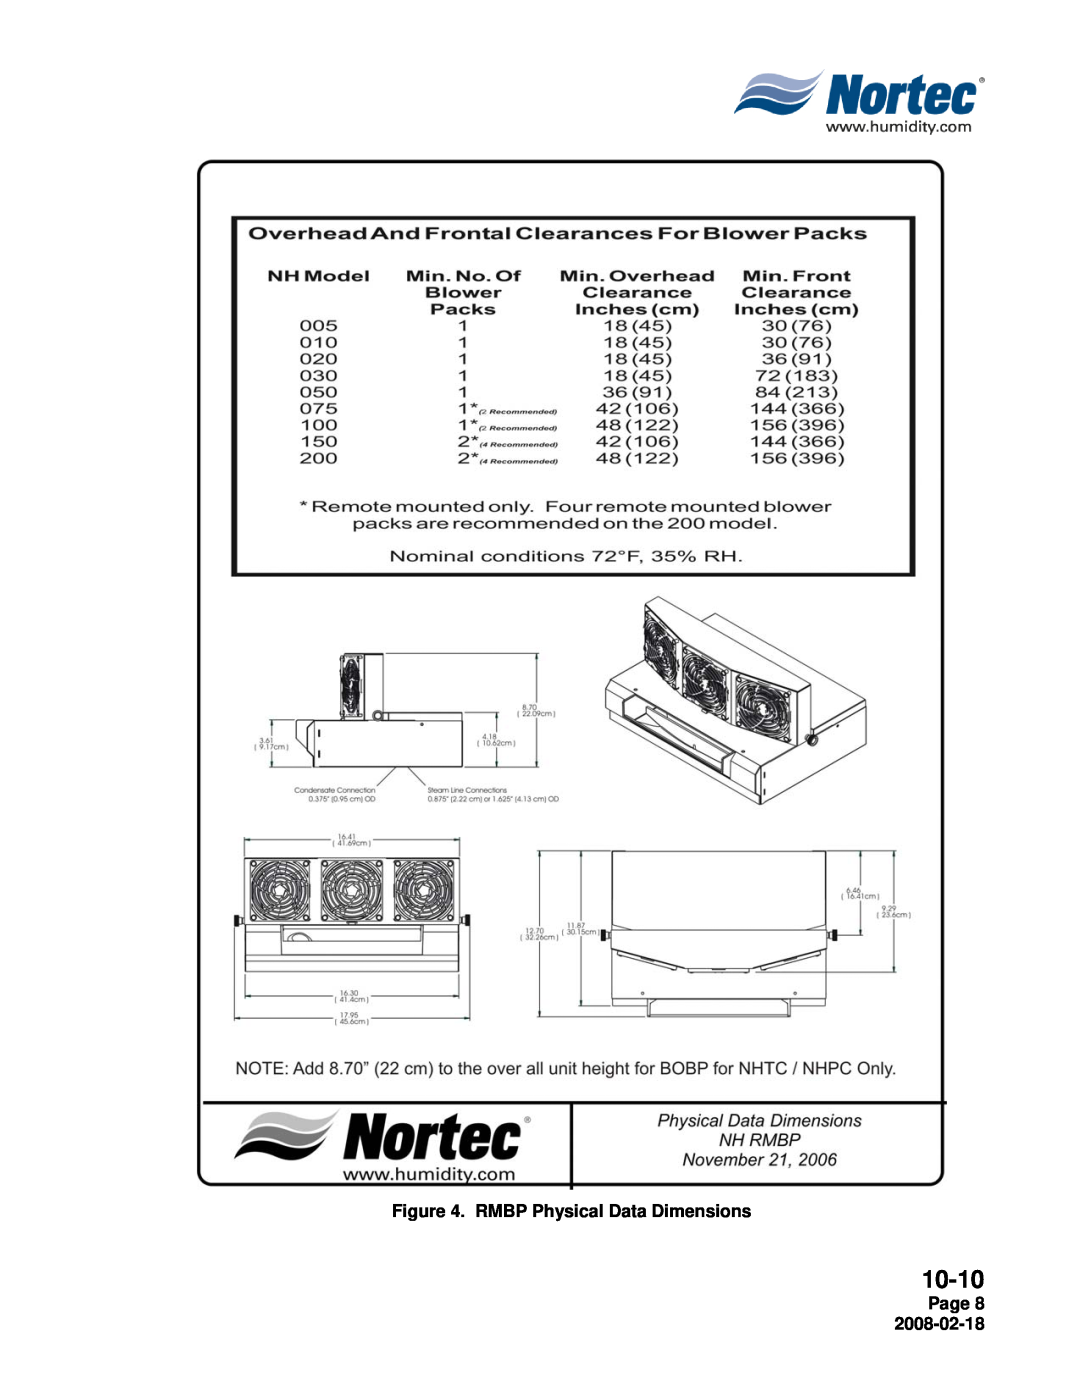 Nortec Industries NHRS Series manual 10-10, RMBP Physical Data Dimensions, Page 8 